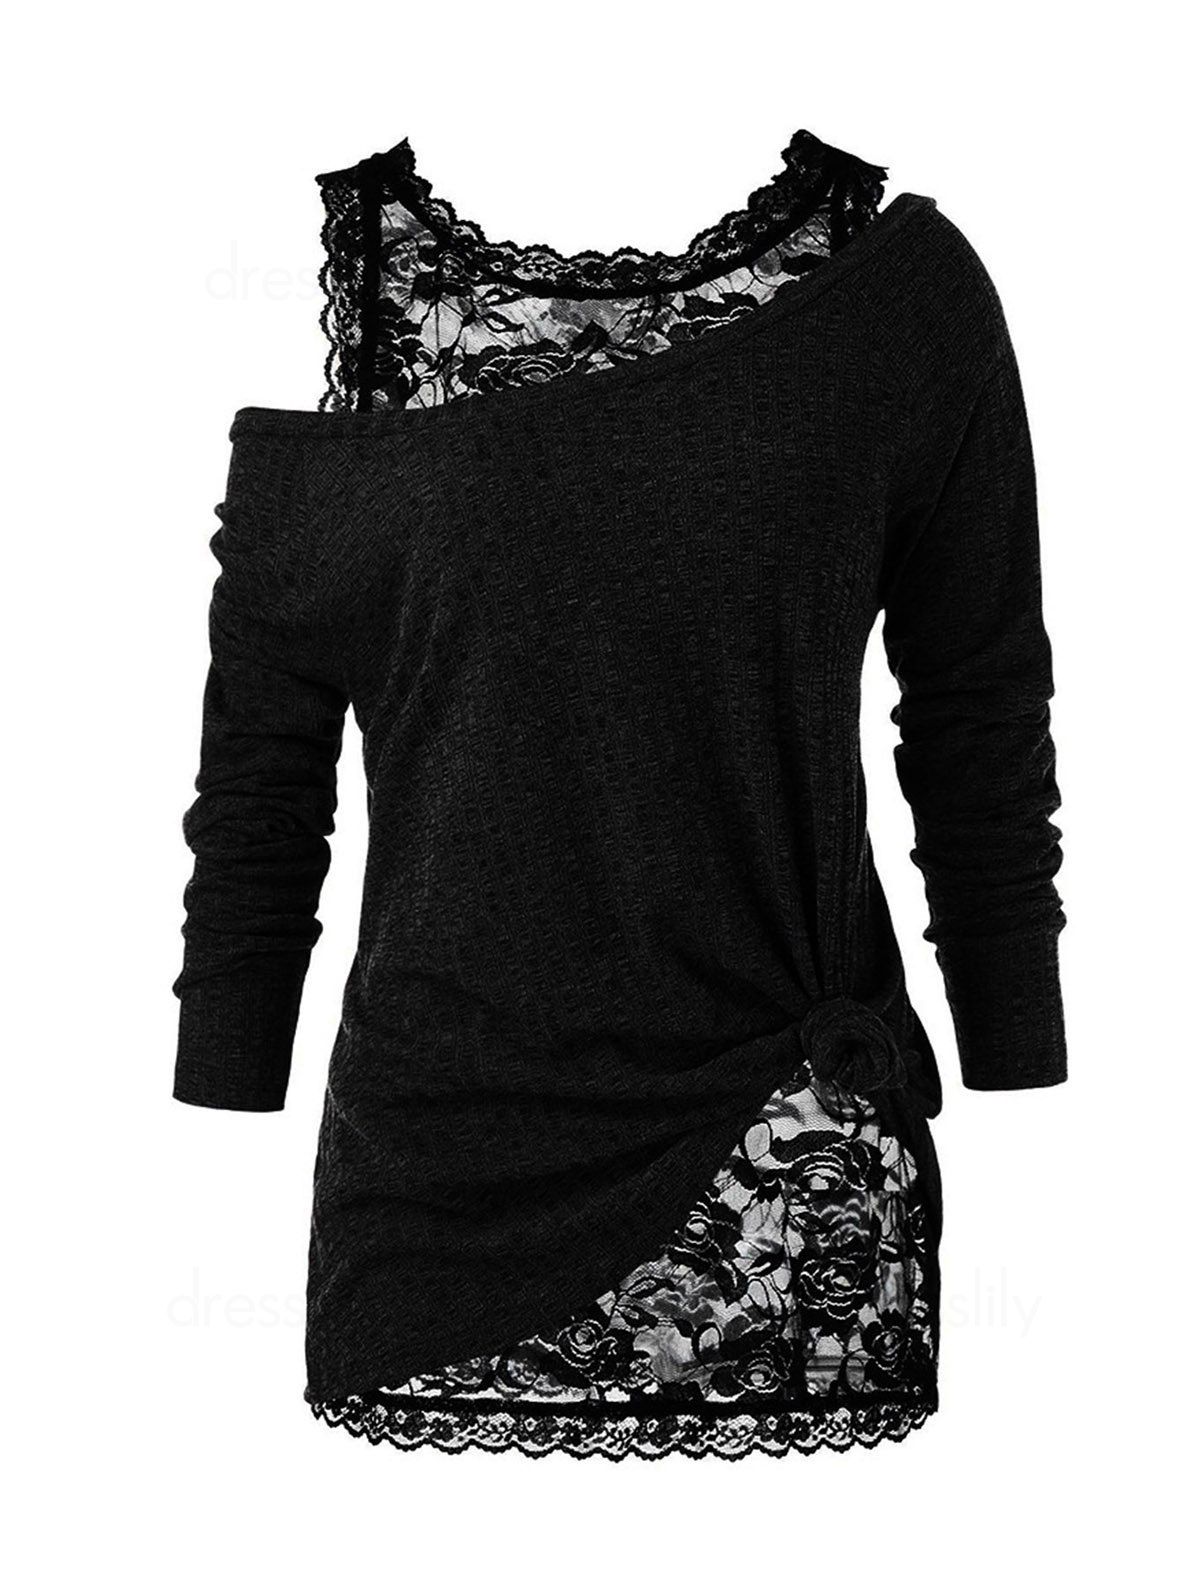 Dresslily Two Piece Top Sheer Floral Lace Tank Top And Solid Color Knit Textured Long Sleeve T Shirt Skew Neck Casual Top